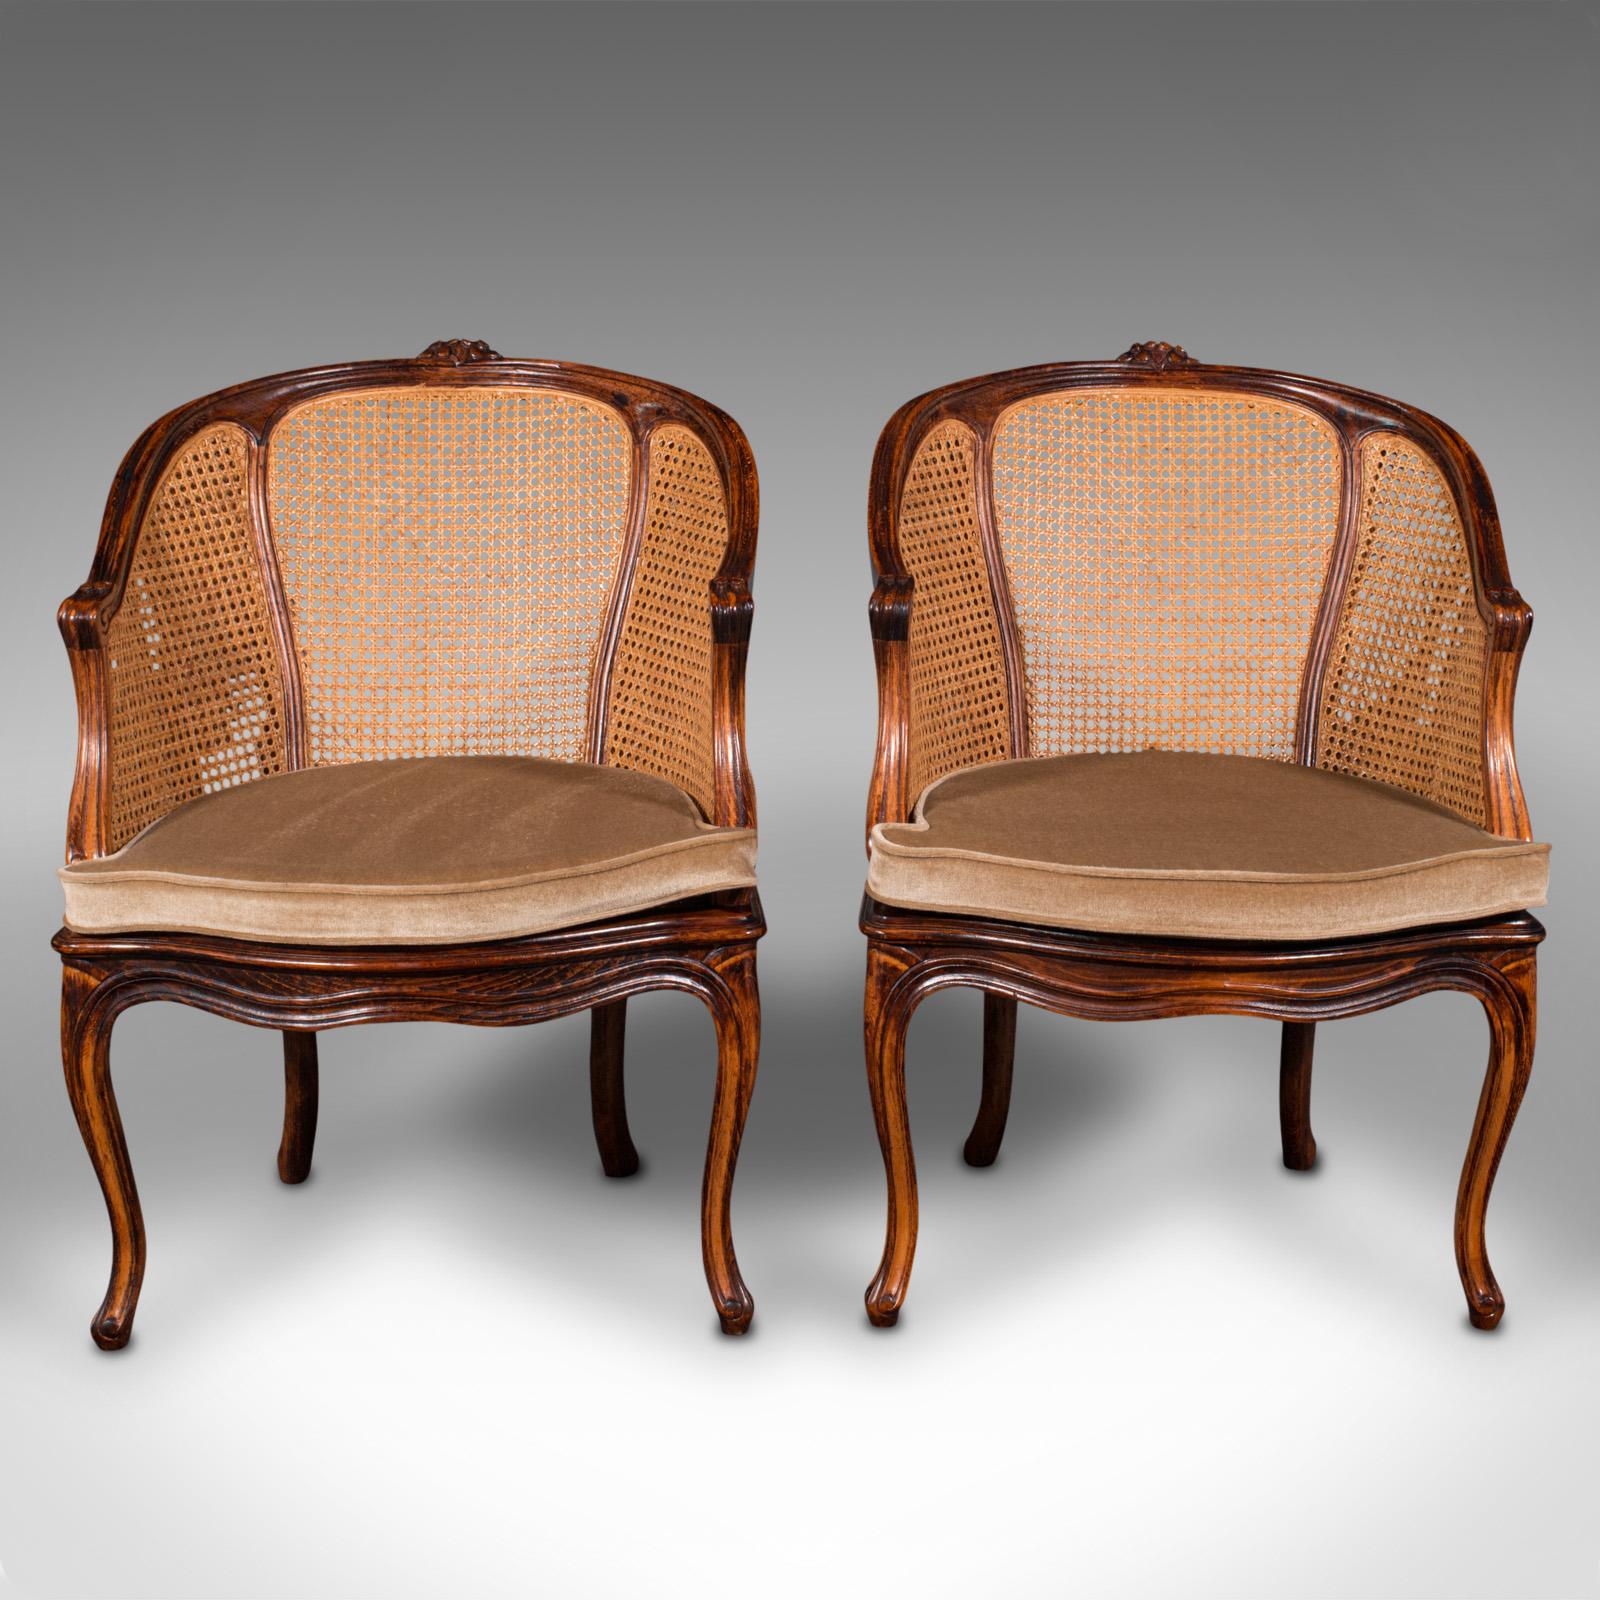 This is a pair of vintage bergère armchairs. A French, beech and cane elbow chair, dating to the mid 20th century, circa 1960.

Delightful lounge chairs with a fine appearance and finish
Displays a desirable aged patina and in good order
Beech